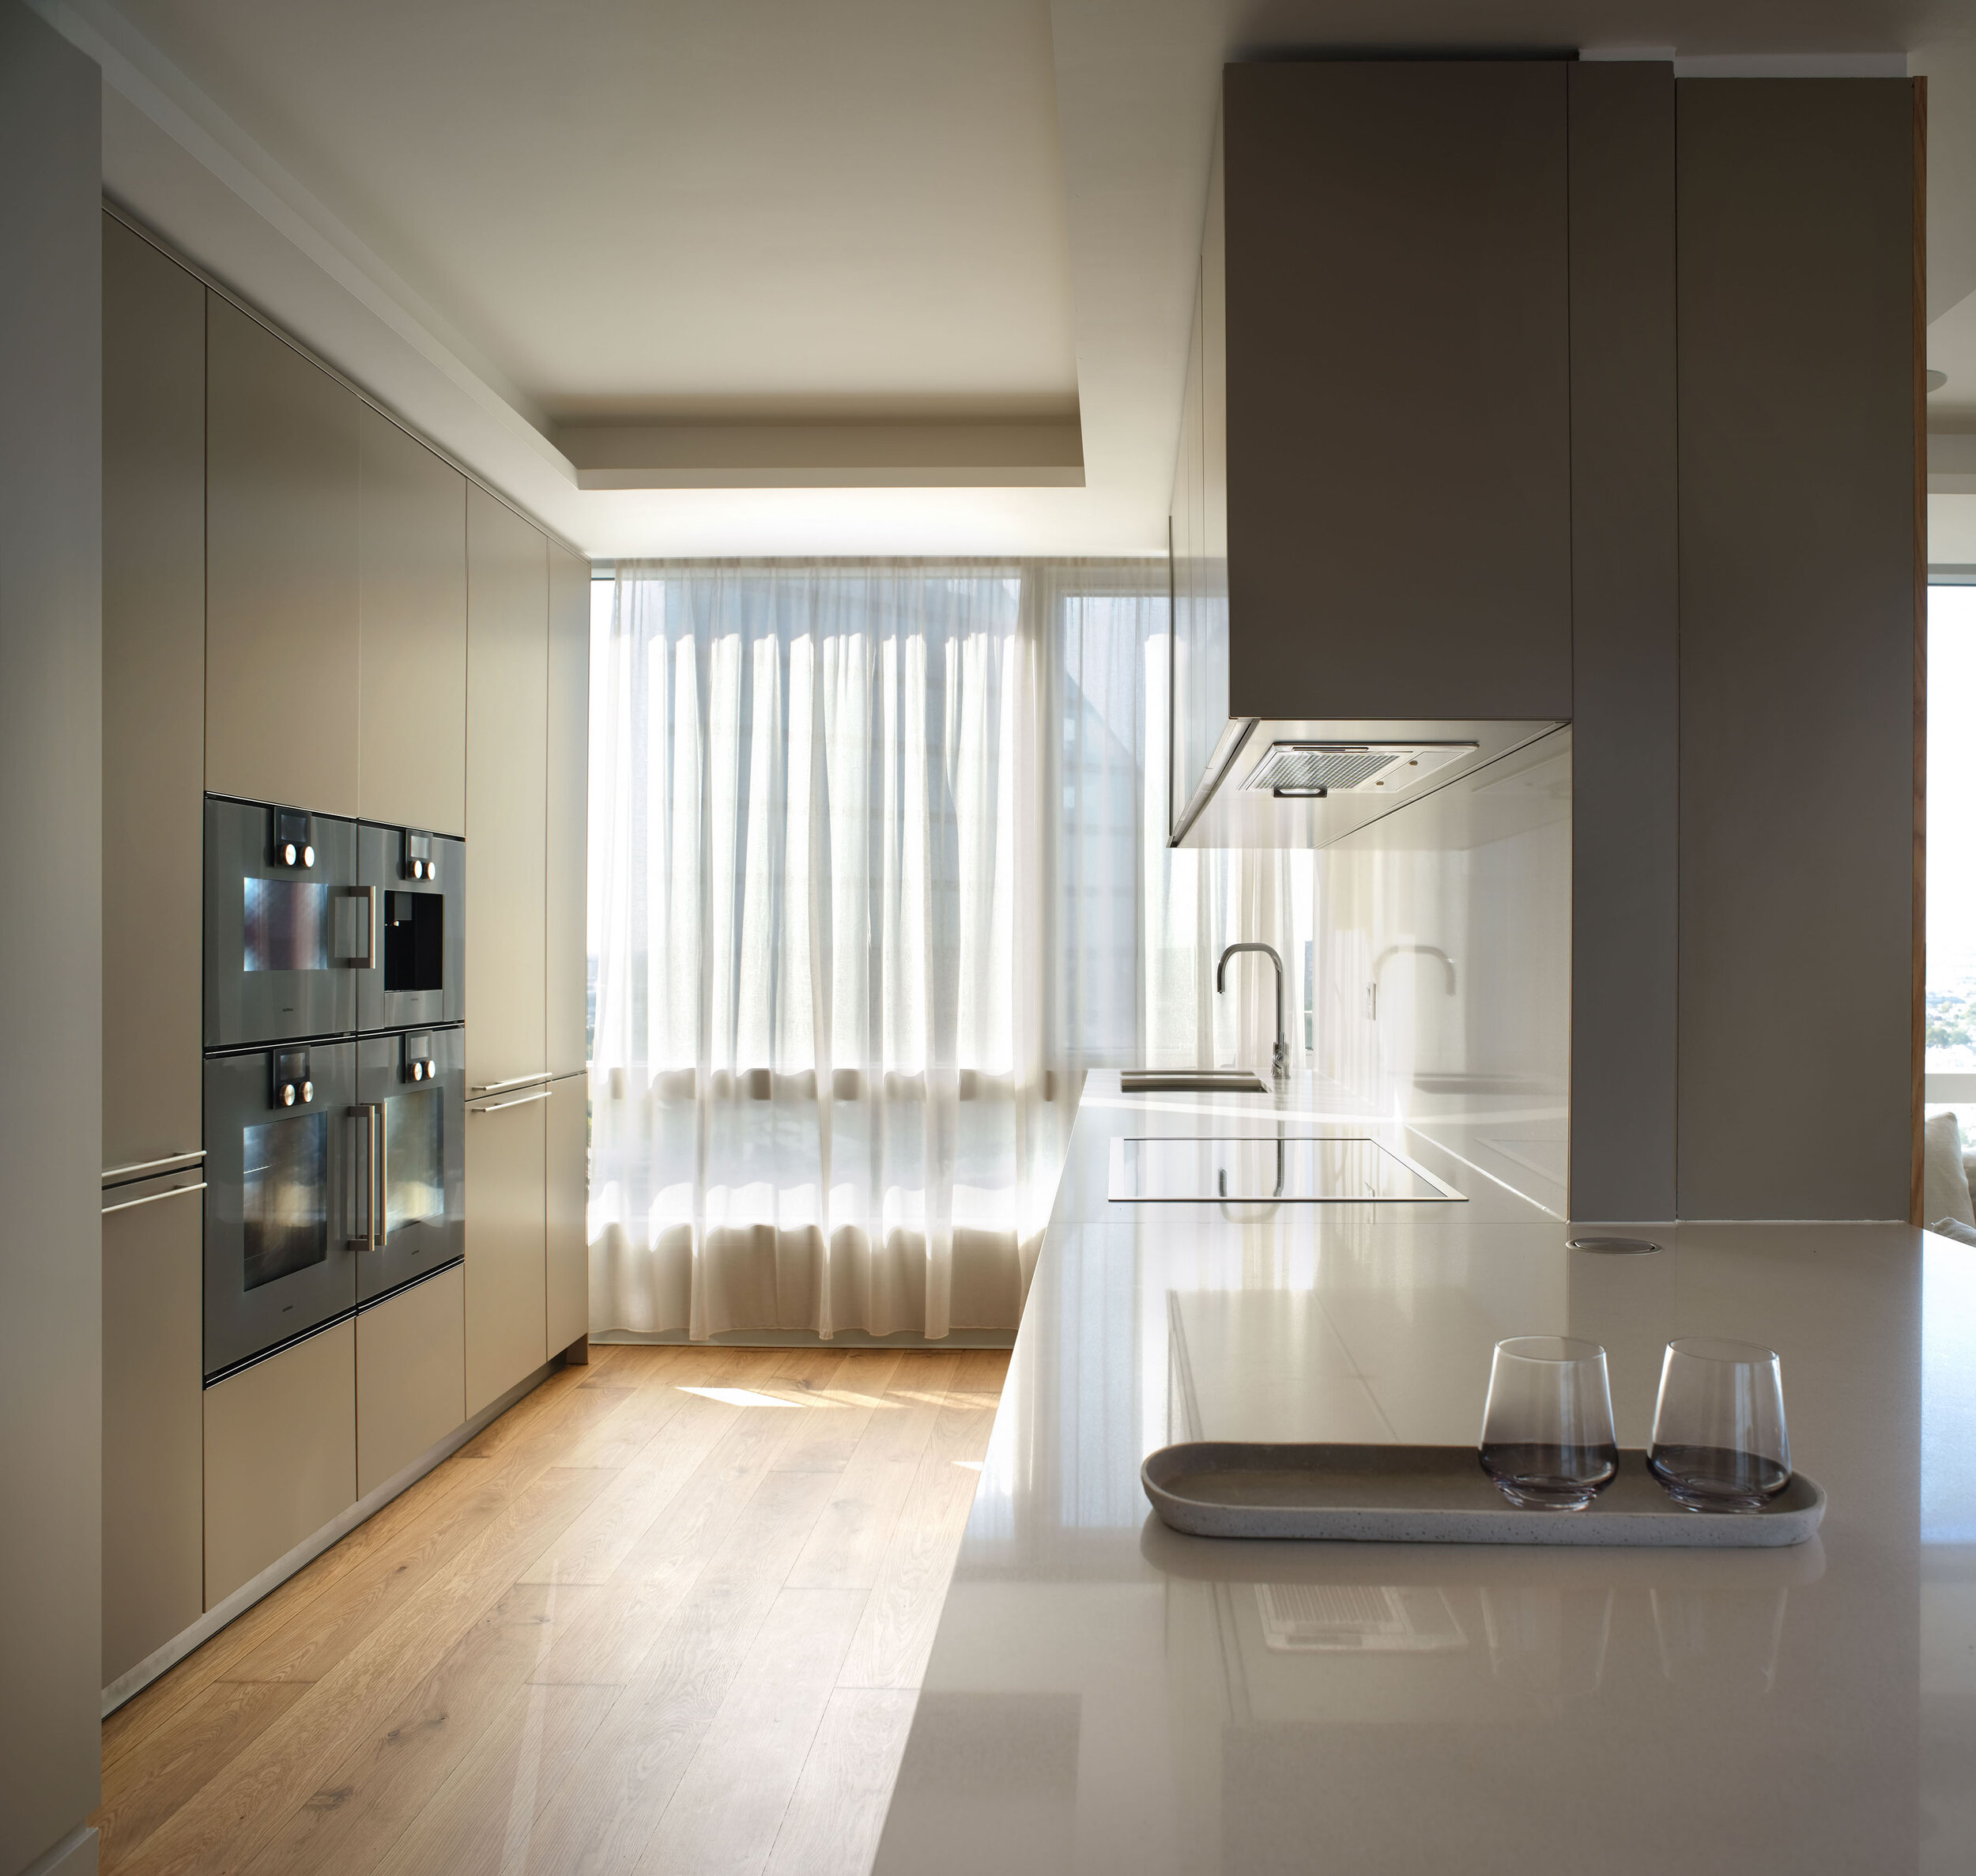 WOMO Architects London Canaletto Interior Apartments Kitchen